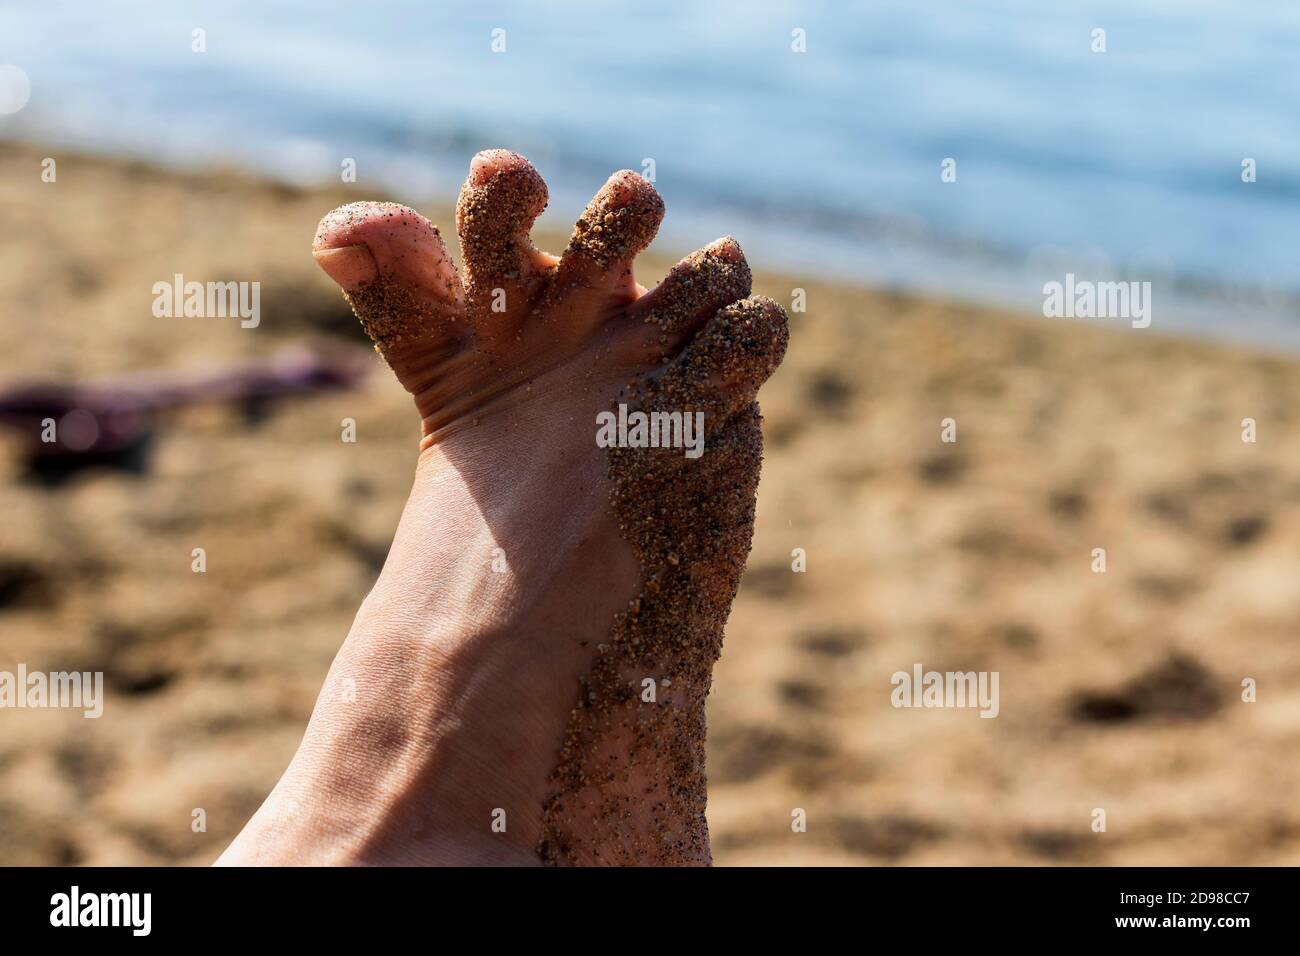 Part of the woman's foot in the sand, close-up. Stock Photo